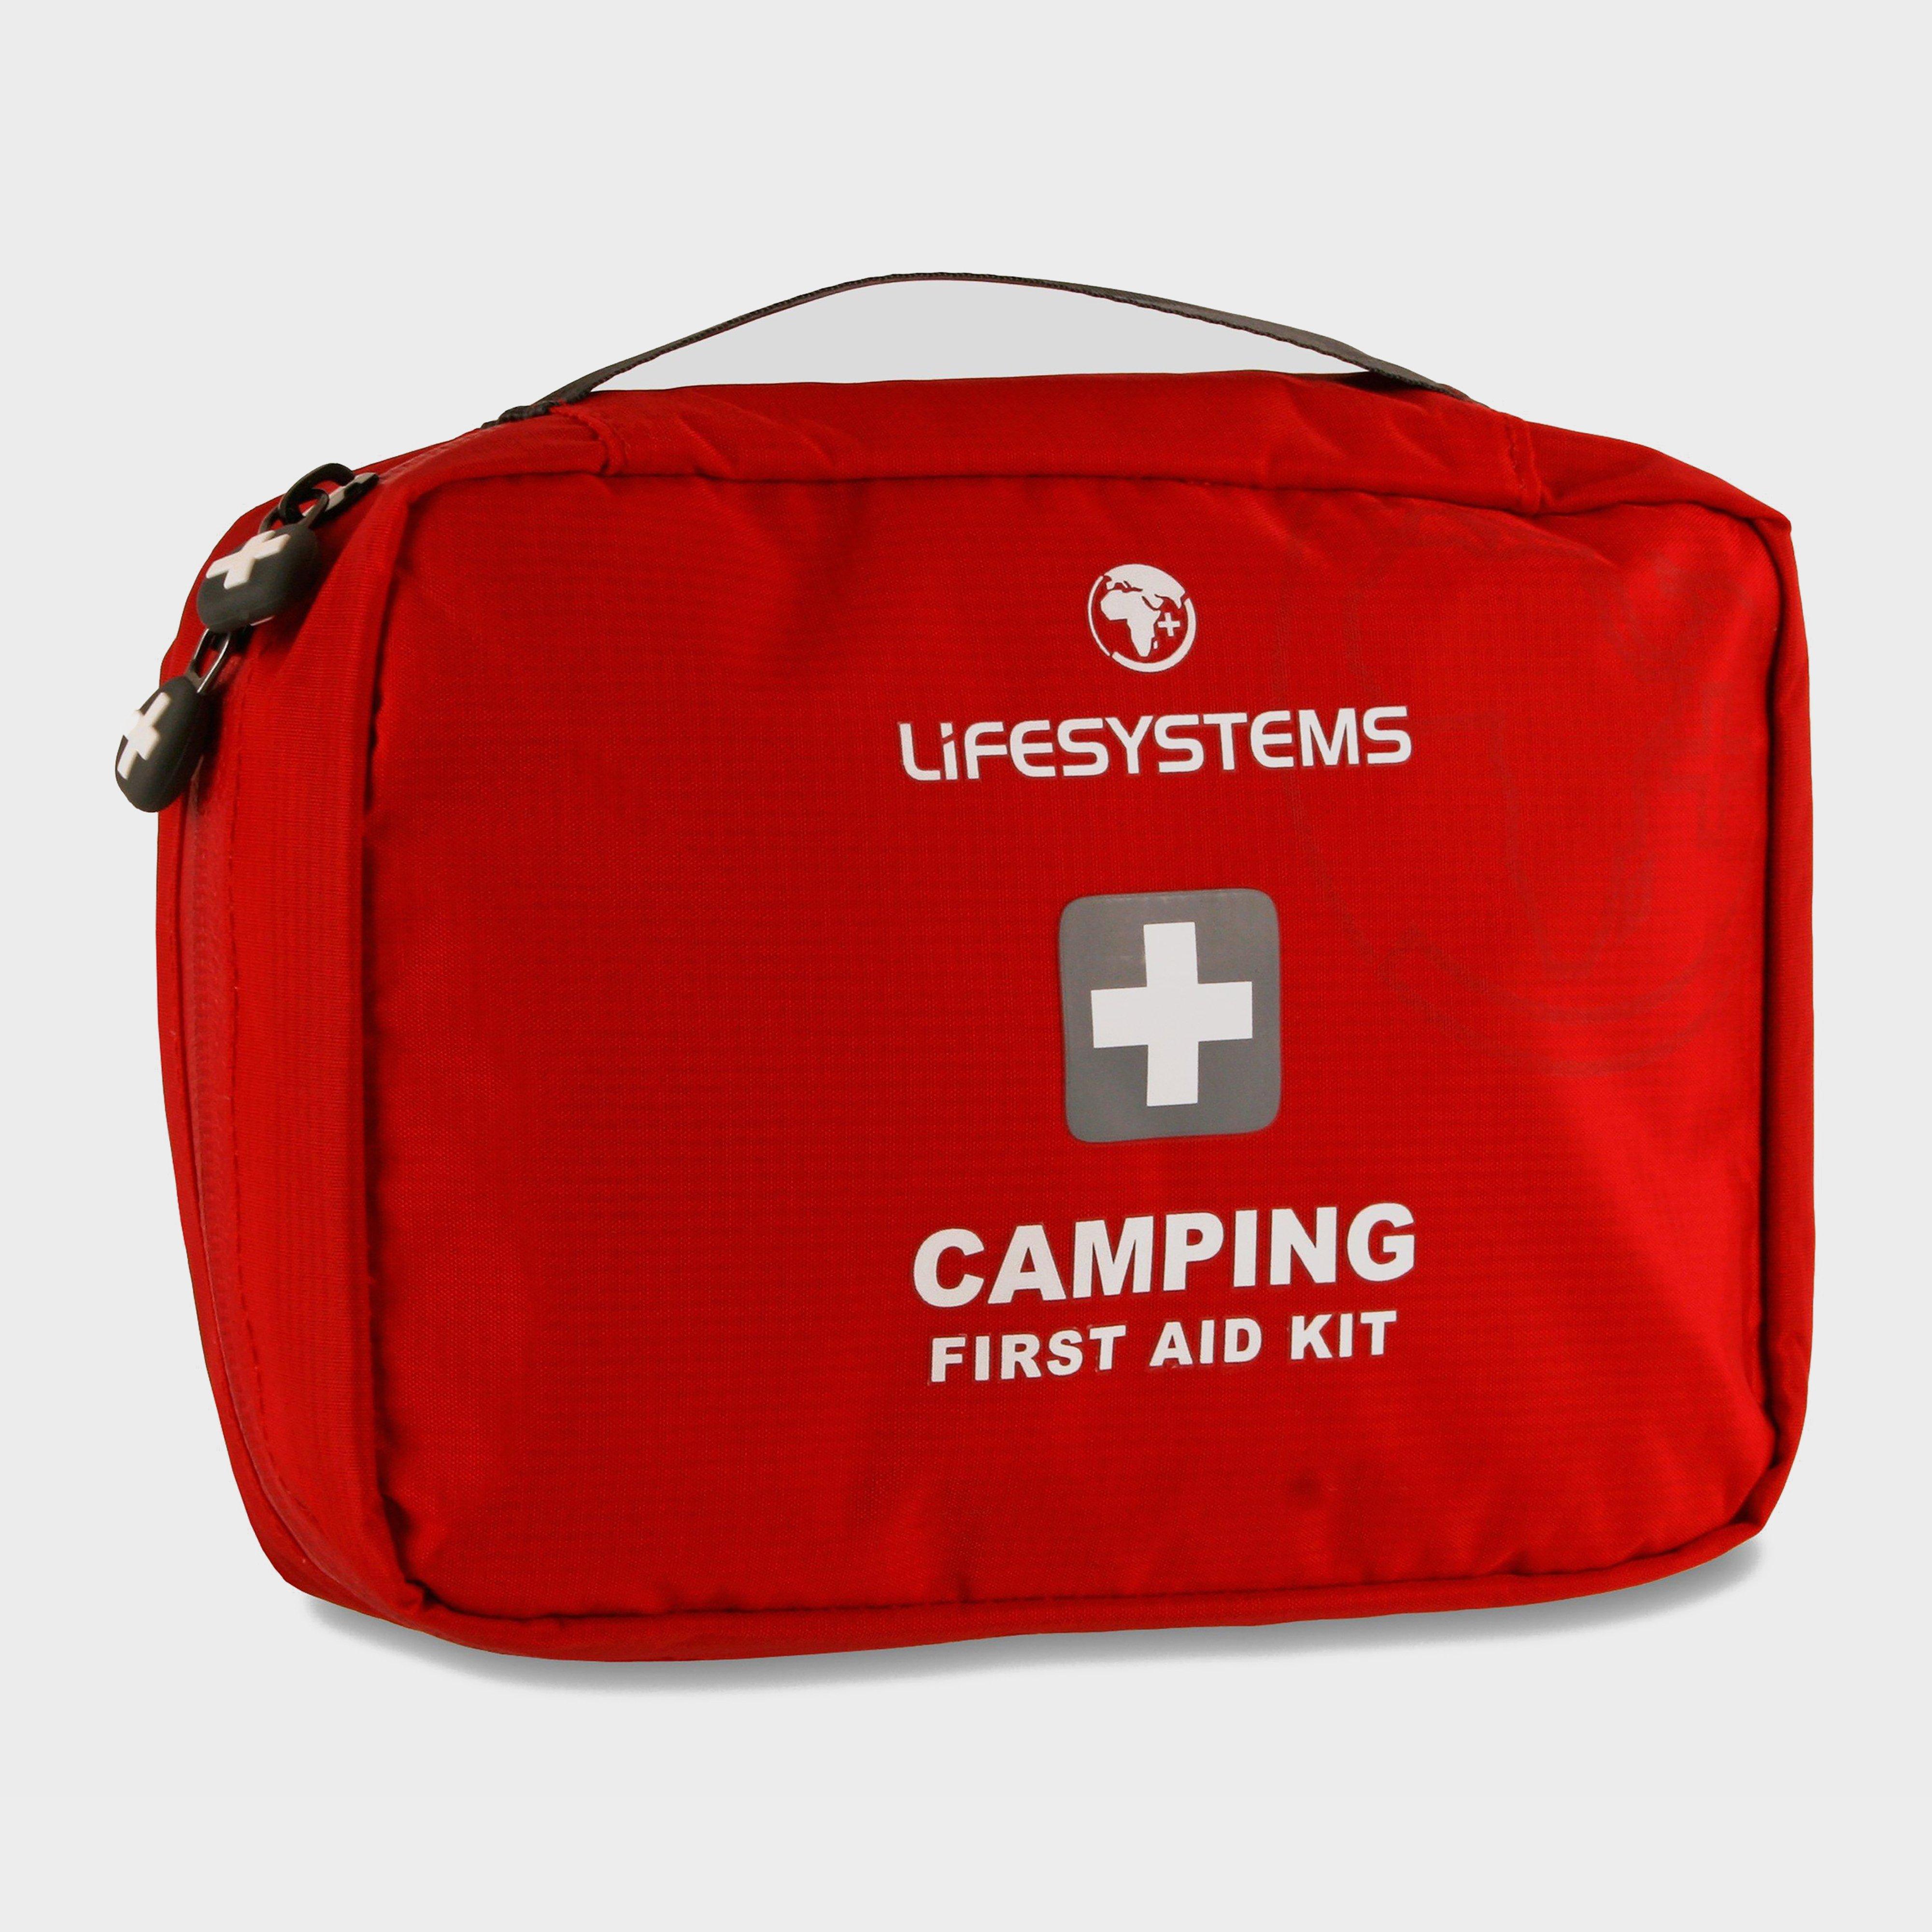 Lifesystems Camping First Aid Kit  Red